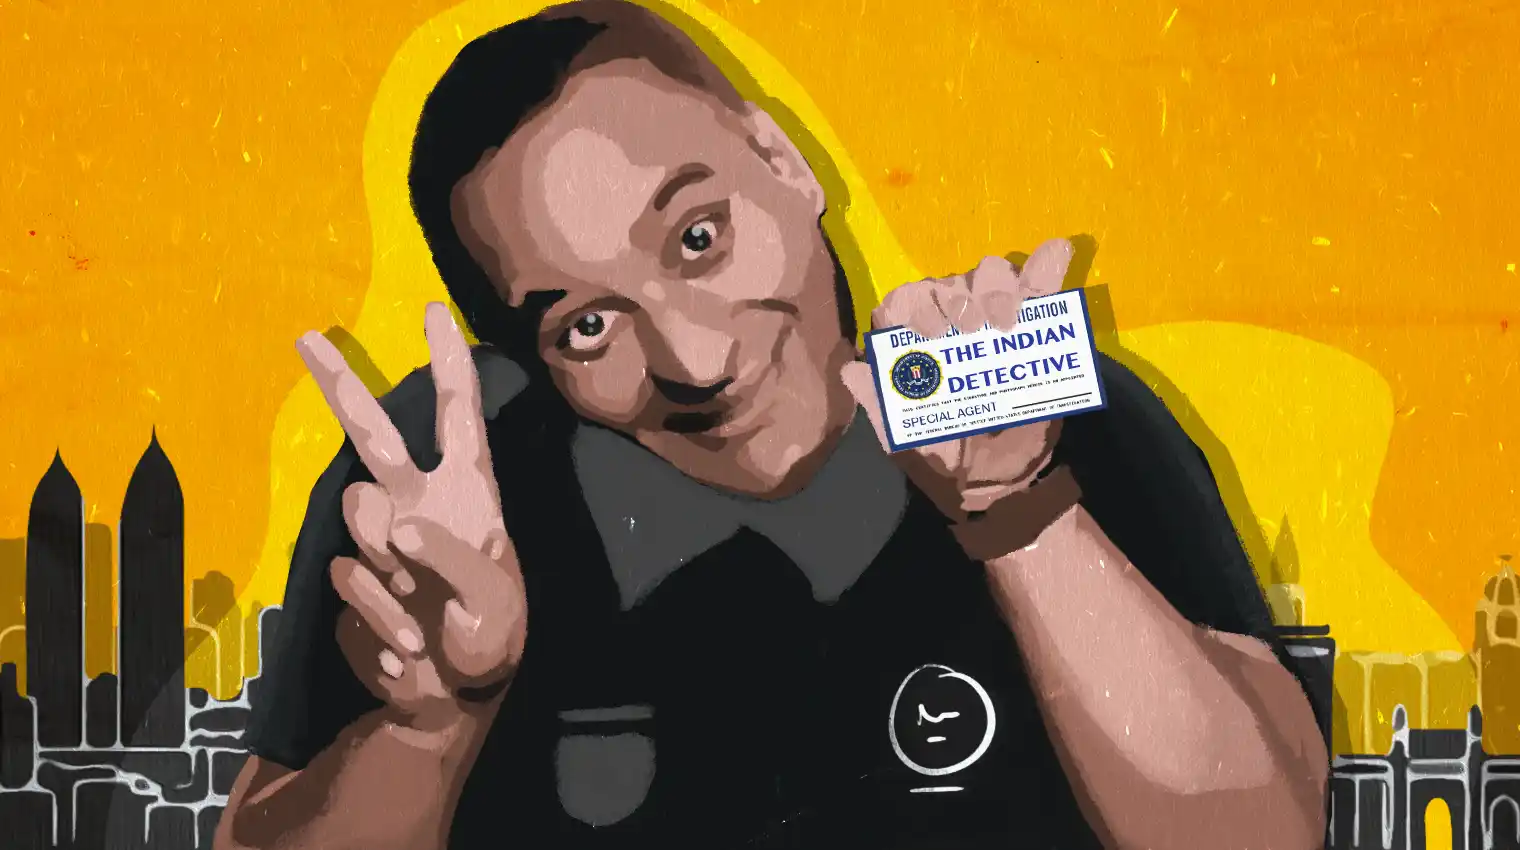 RussellPeters